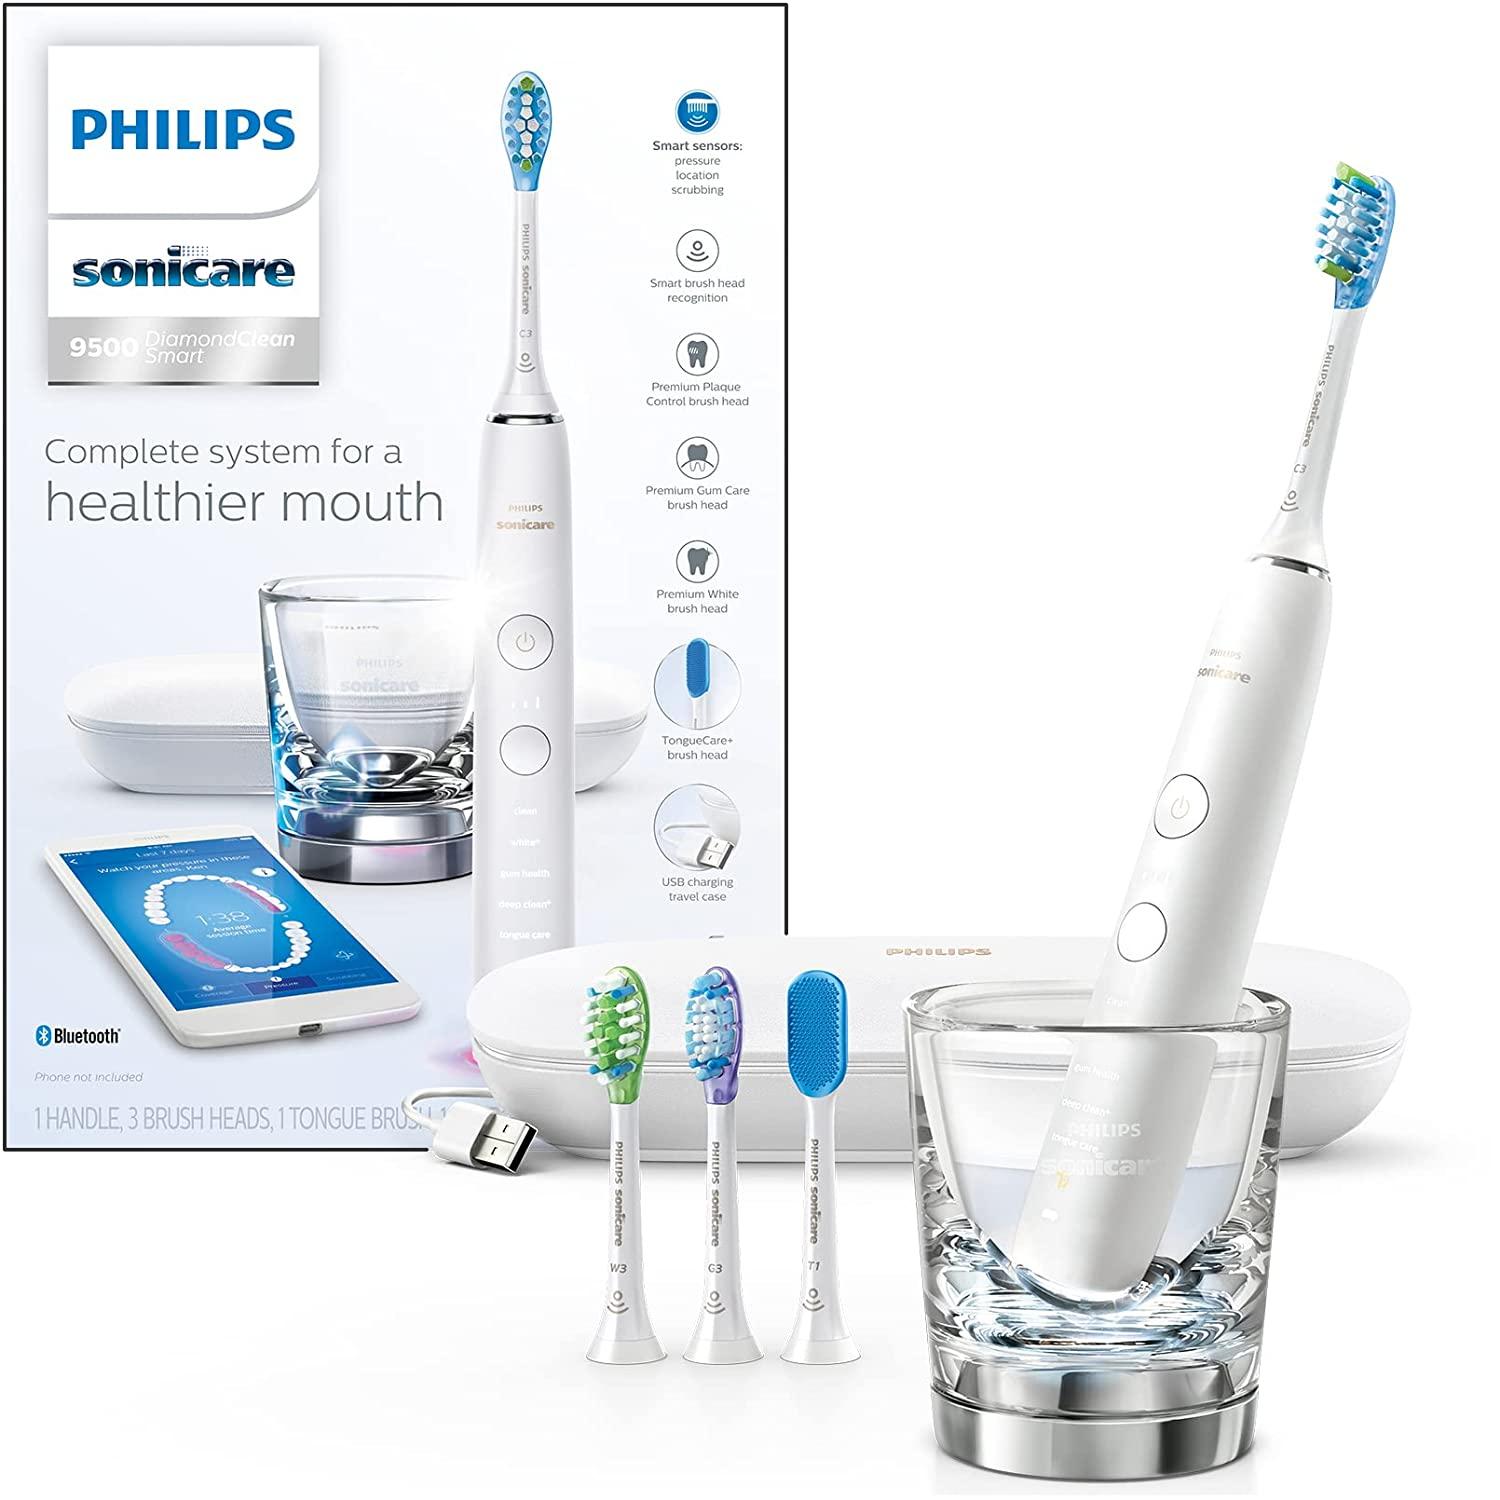 Philips Sonicare DiamondClean Smart 9500 Rechargeable Electric Toothbrush for $159.95